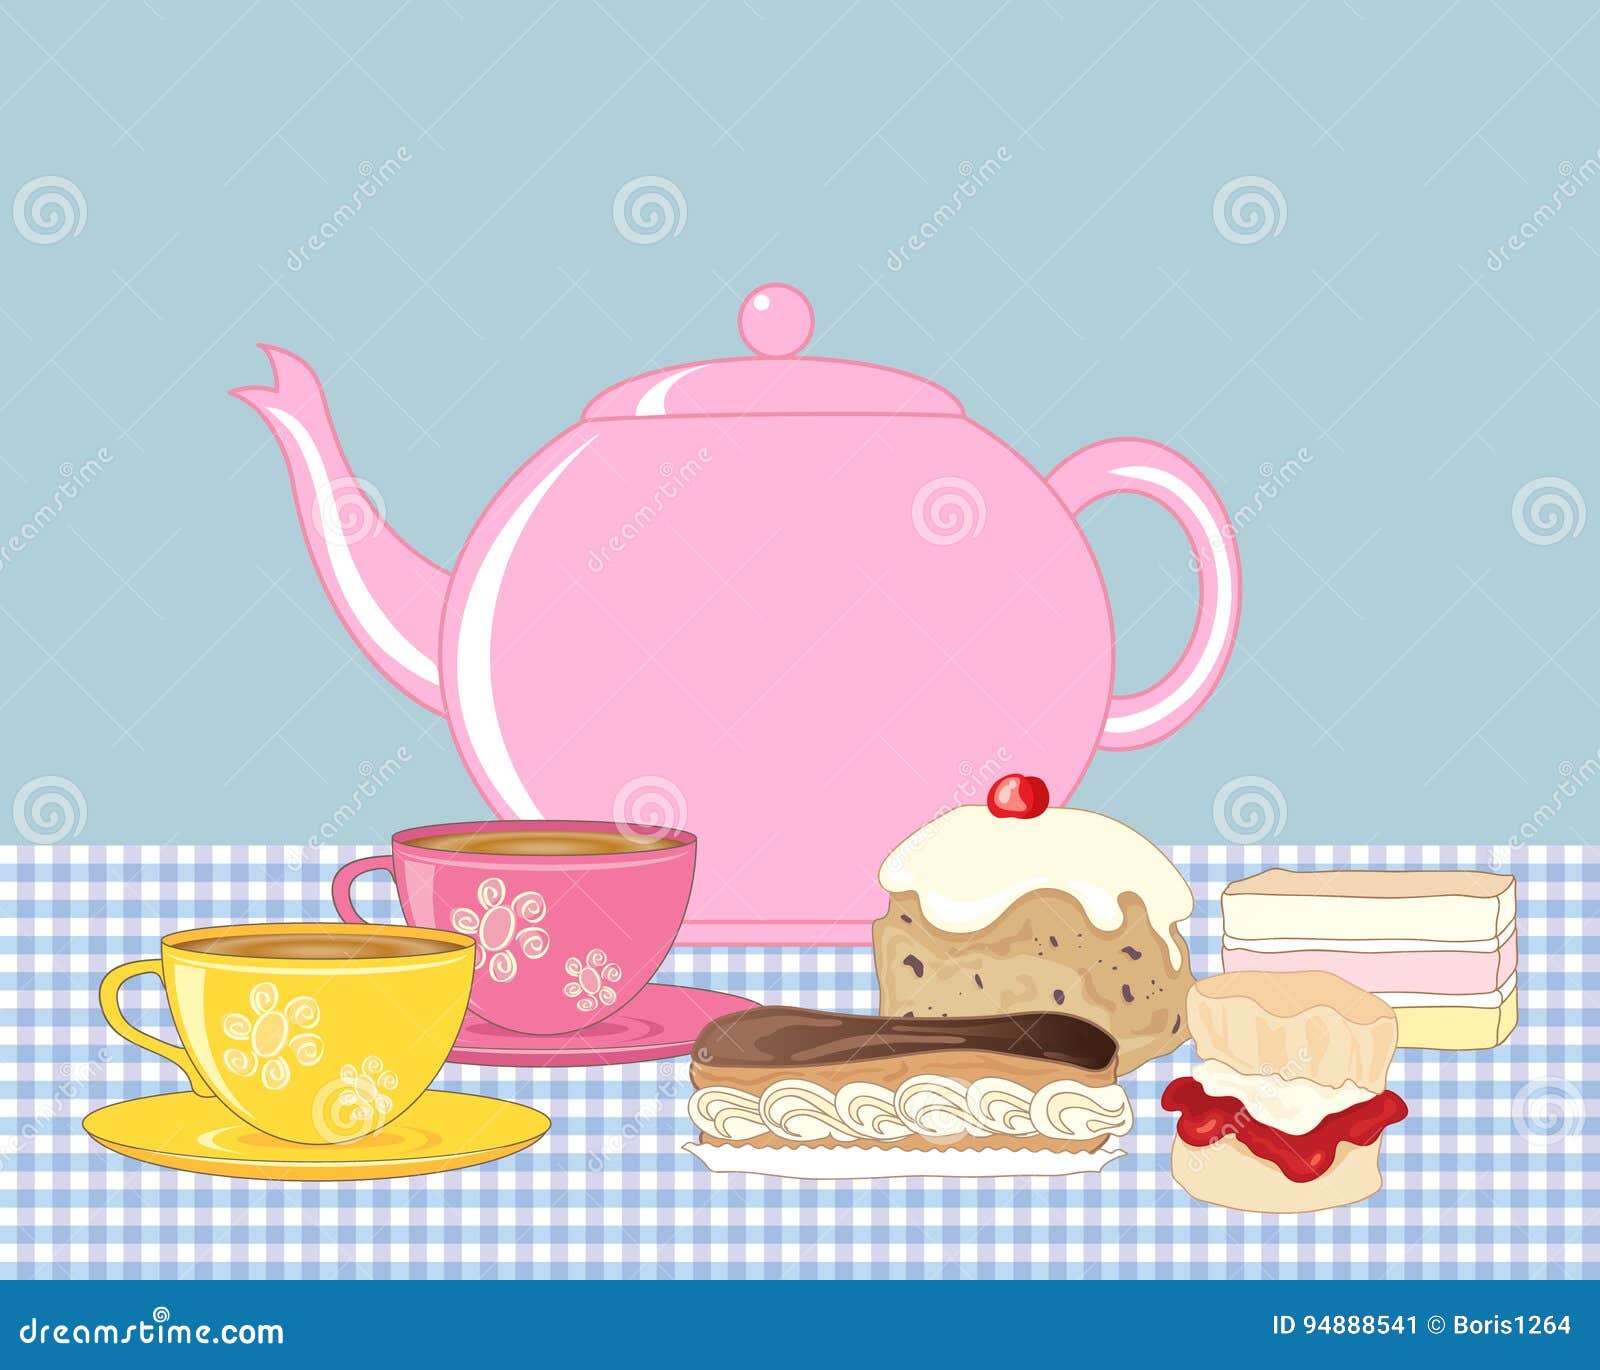 Tea And Buns Stock Vector. Illustration Of Advert, Refreshments - 94888541